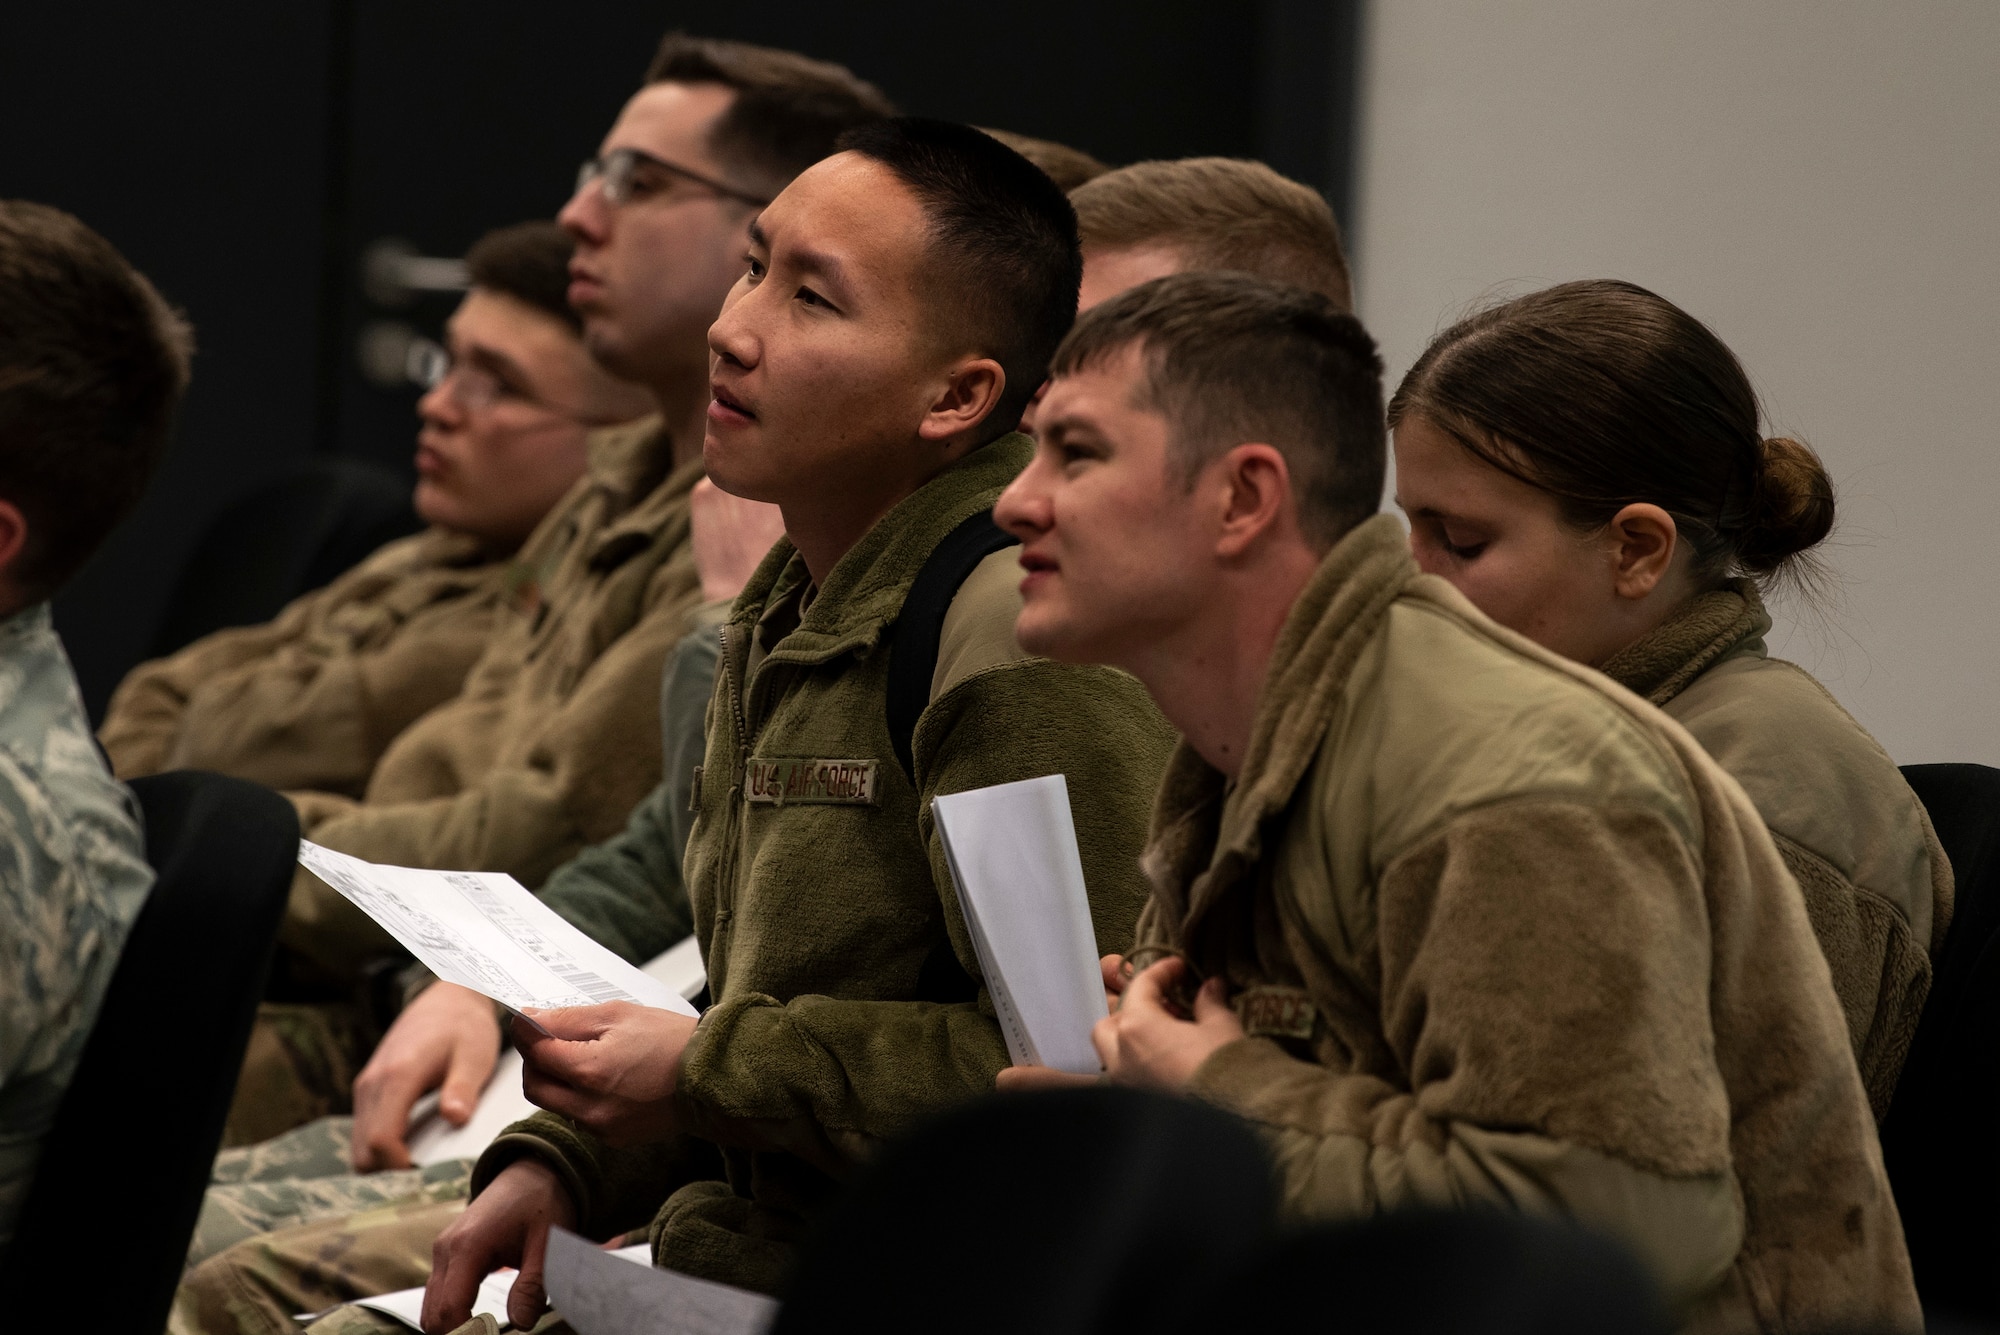 U.S. Air Force Airmen from the 52nd Logistics Readiness Squadron listen to a briefing at Ramstein Air Base, Germany, Jan. 22, 2020. Different units from the 52nd Fighter Wing participated in an Agile Combat Employment exercise to practice generating combat airpower in a deployed environment. 52nd LRS Airmen obtained training needed to drive on Ramstein's flightline. (U.S. Air Force photo by Airman 1st Class Valerie Seelye)